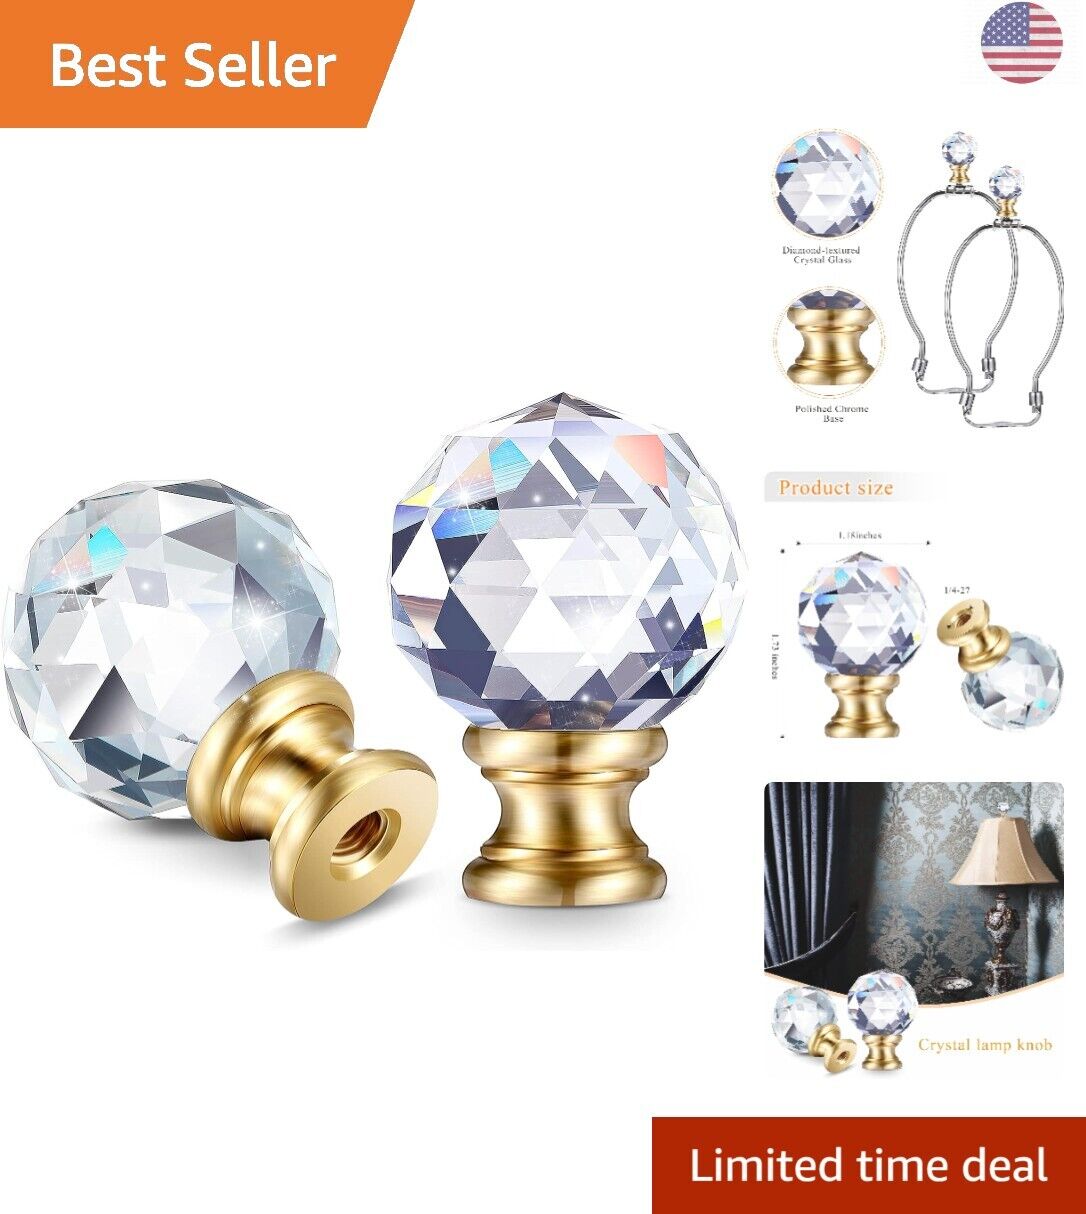 2 Pack Modern Diamond Crystal Lamp Knob with Polished Chrome Base - 1-3/4 Inches